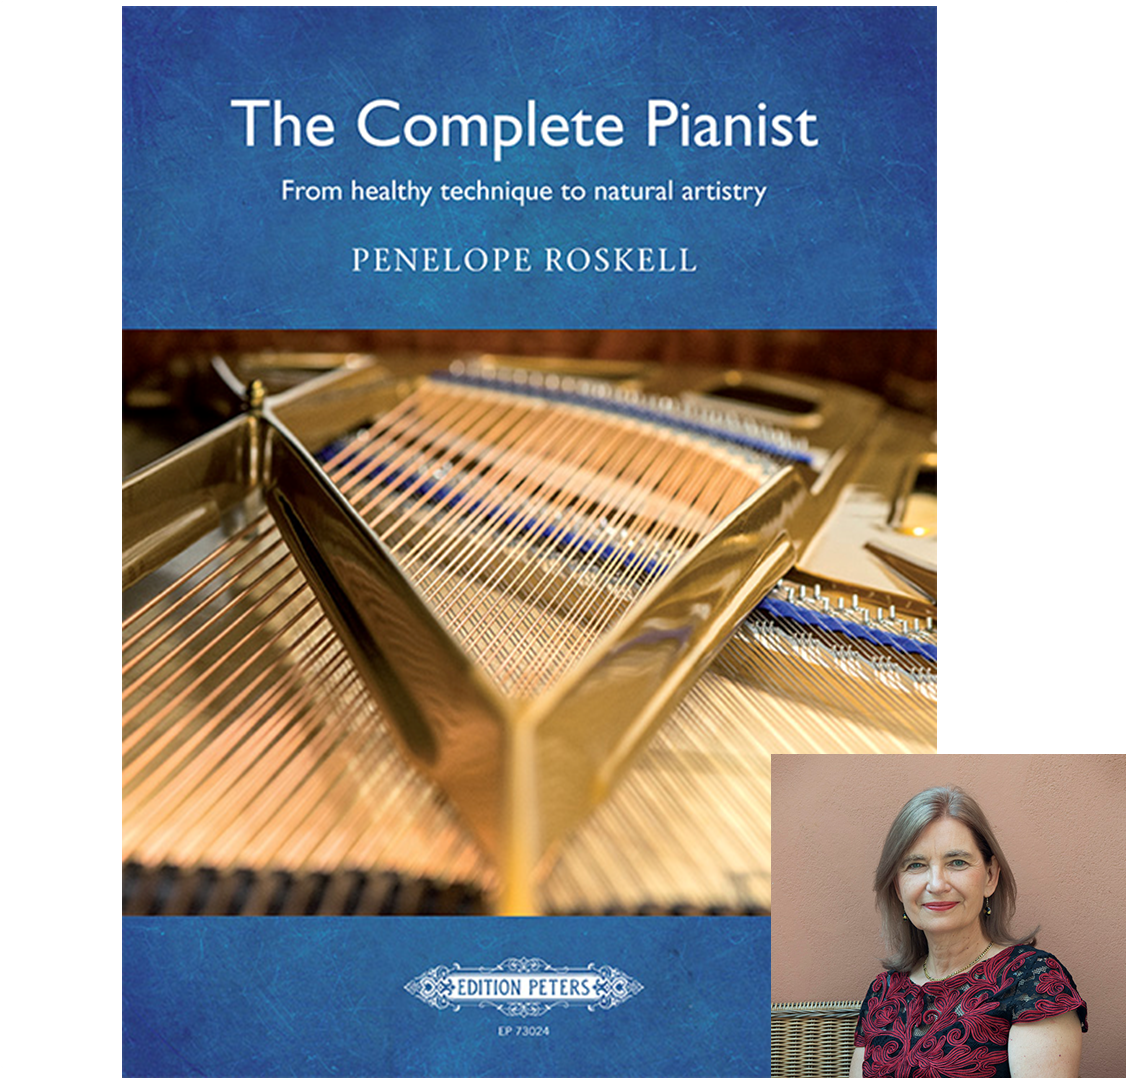 The Complete Pianist: From healthy technique to natural artistry